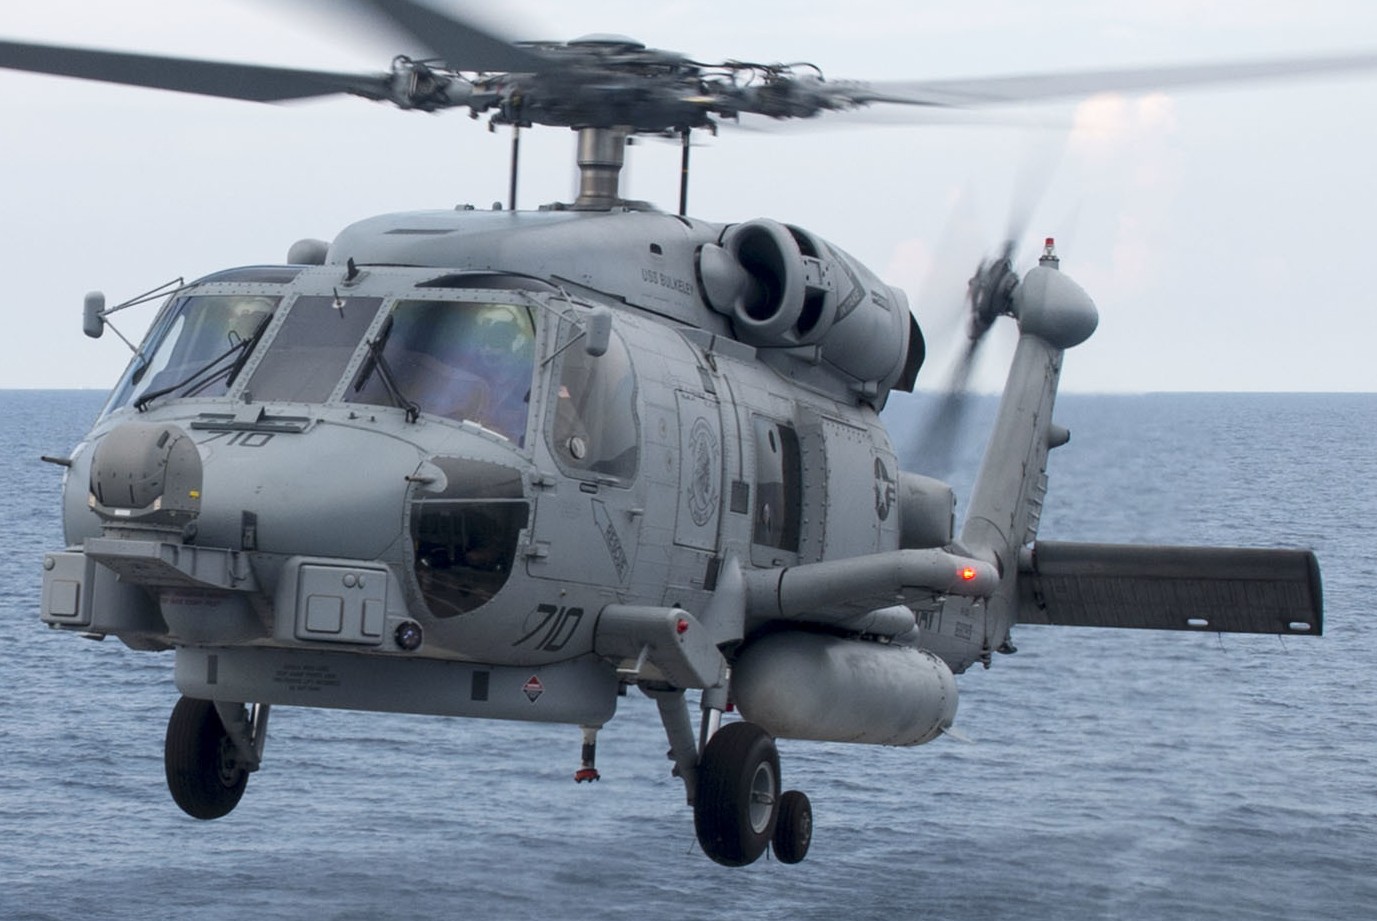 hsm-72 proud warriors helicopter maritime strike squadron us navy mh-60r seahawk 2015 22